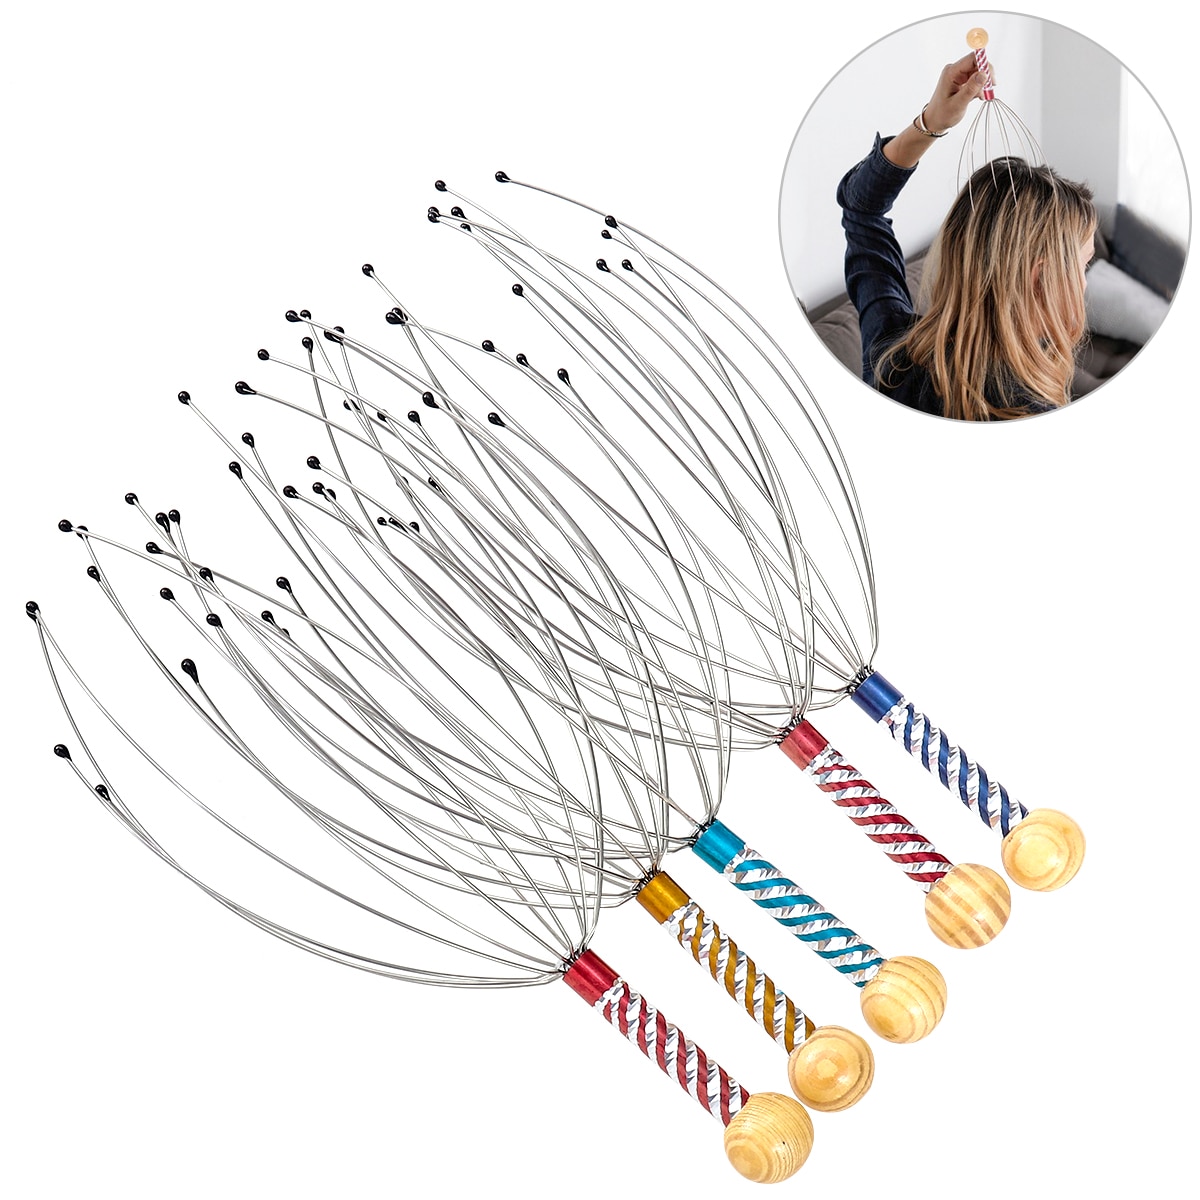 Therapeutic Head Scratcher Steel Wire Head Massager With Wooden Handle Relax Tool